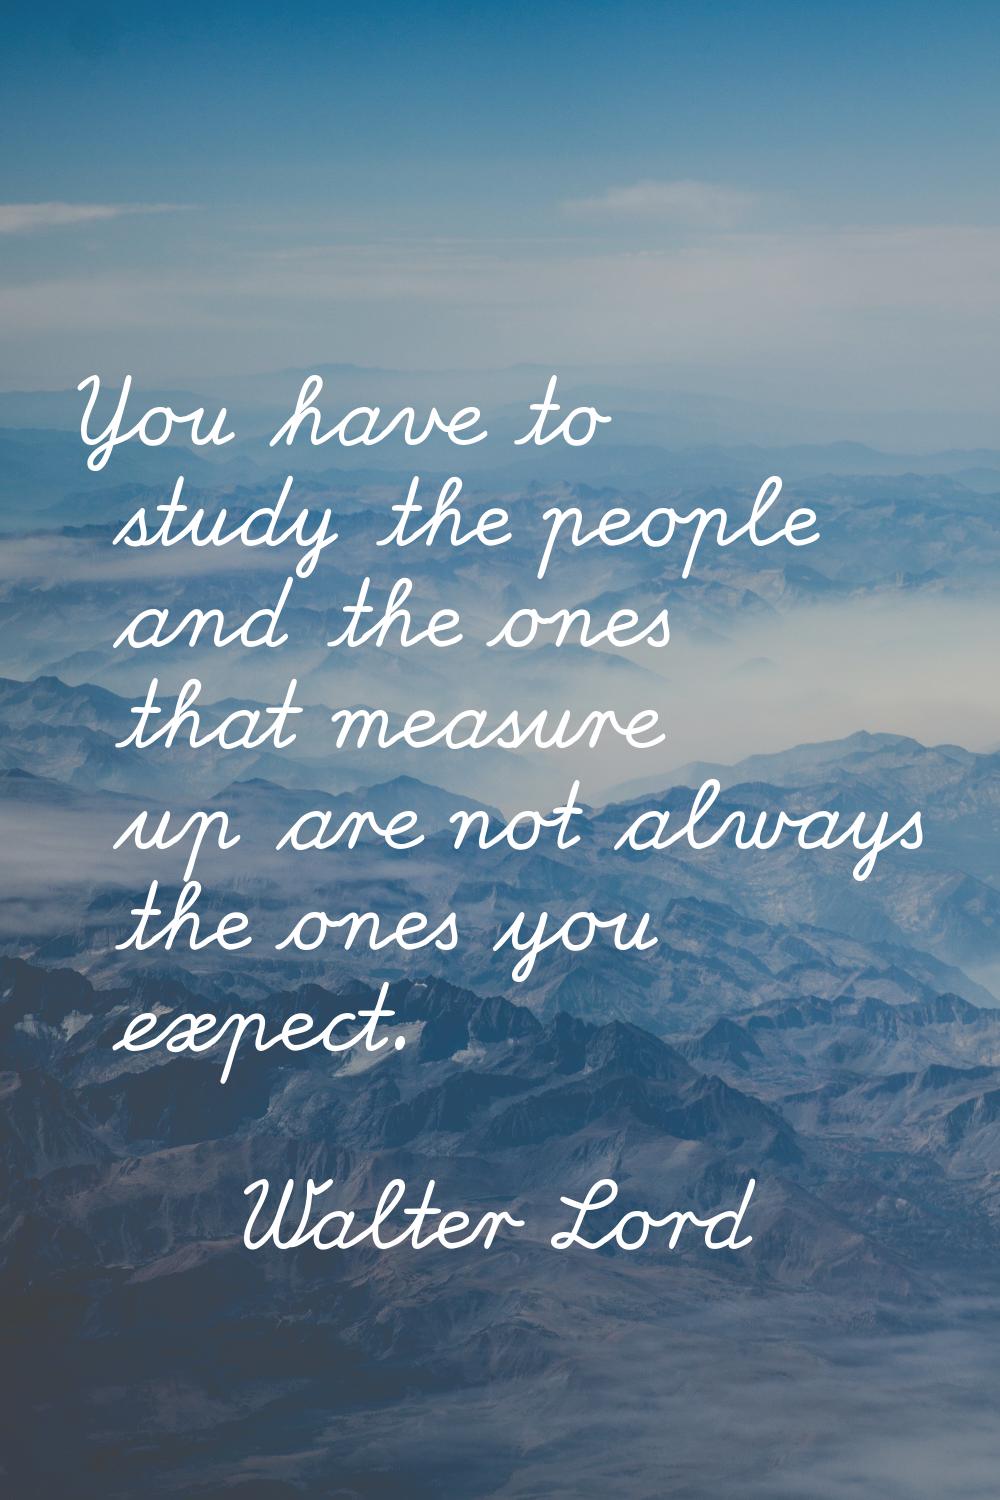 You have to study the people and the ones that measure up are not always the ones you expect.